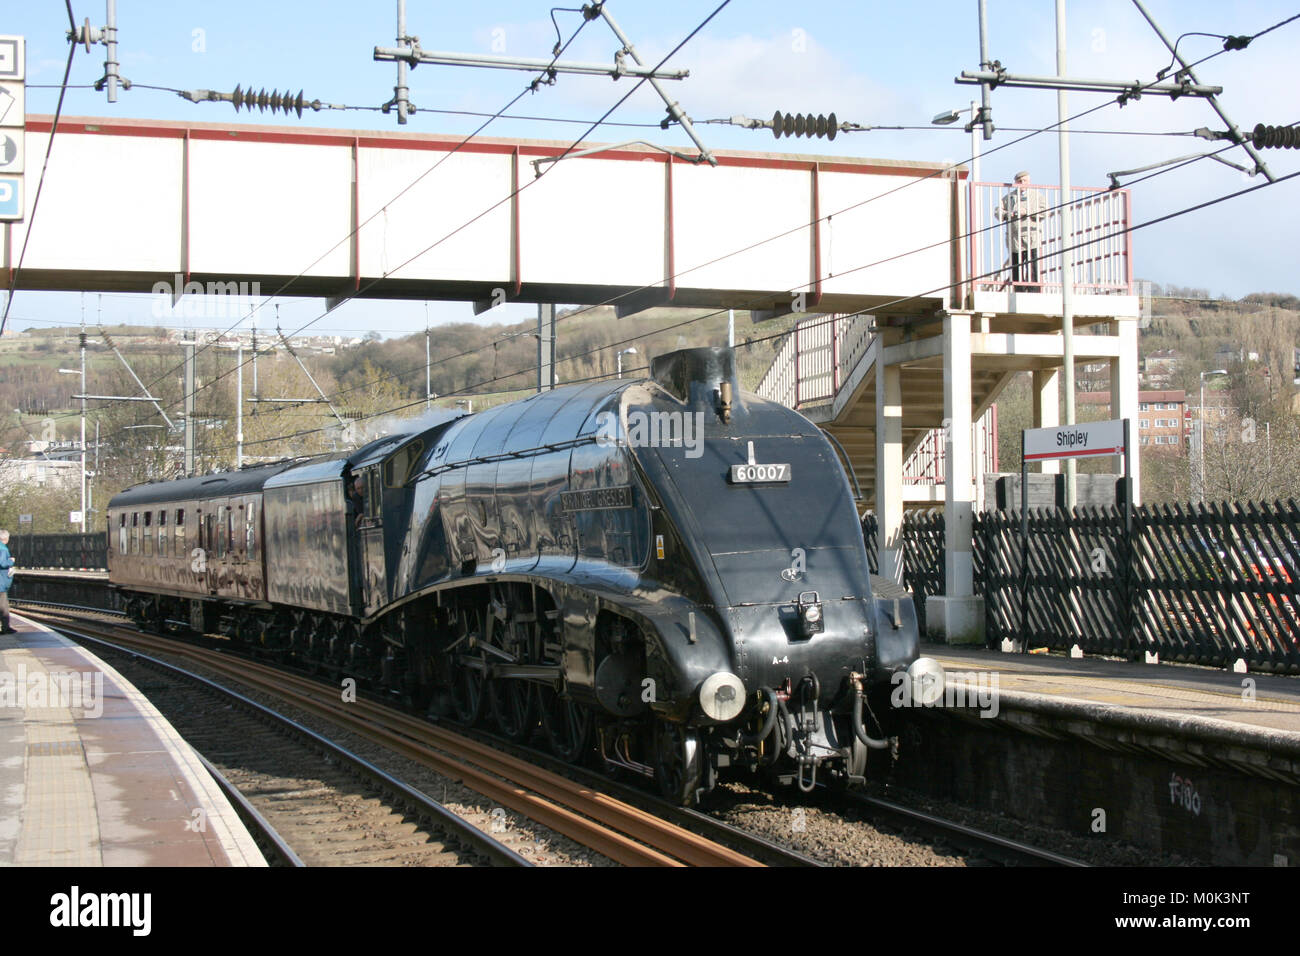 A4 Steam Locomotive Sir Nigel Gresley on the way from Grosmont to Carnforth - Shipley, Yorkshire, UK - 15th April 2008 Stock Photo